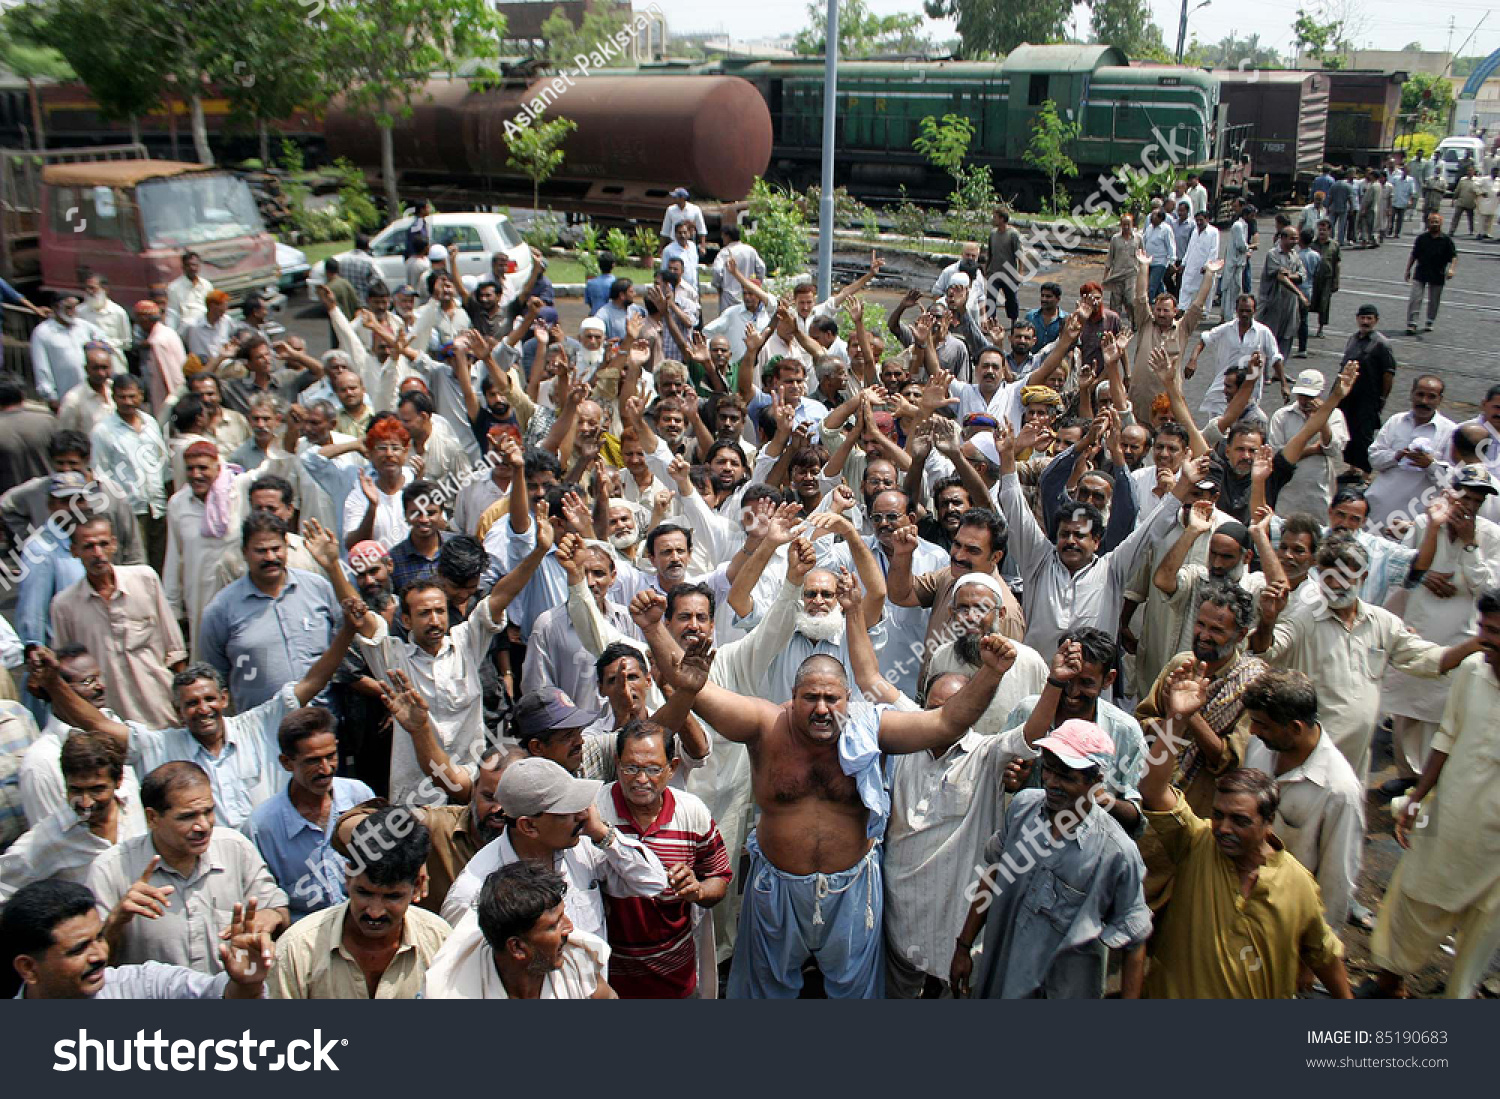 stock-photo-karachi-pakistan-sept-employees-of-railway-are-protesting-against-non-payment-of-their-85190683.jpg